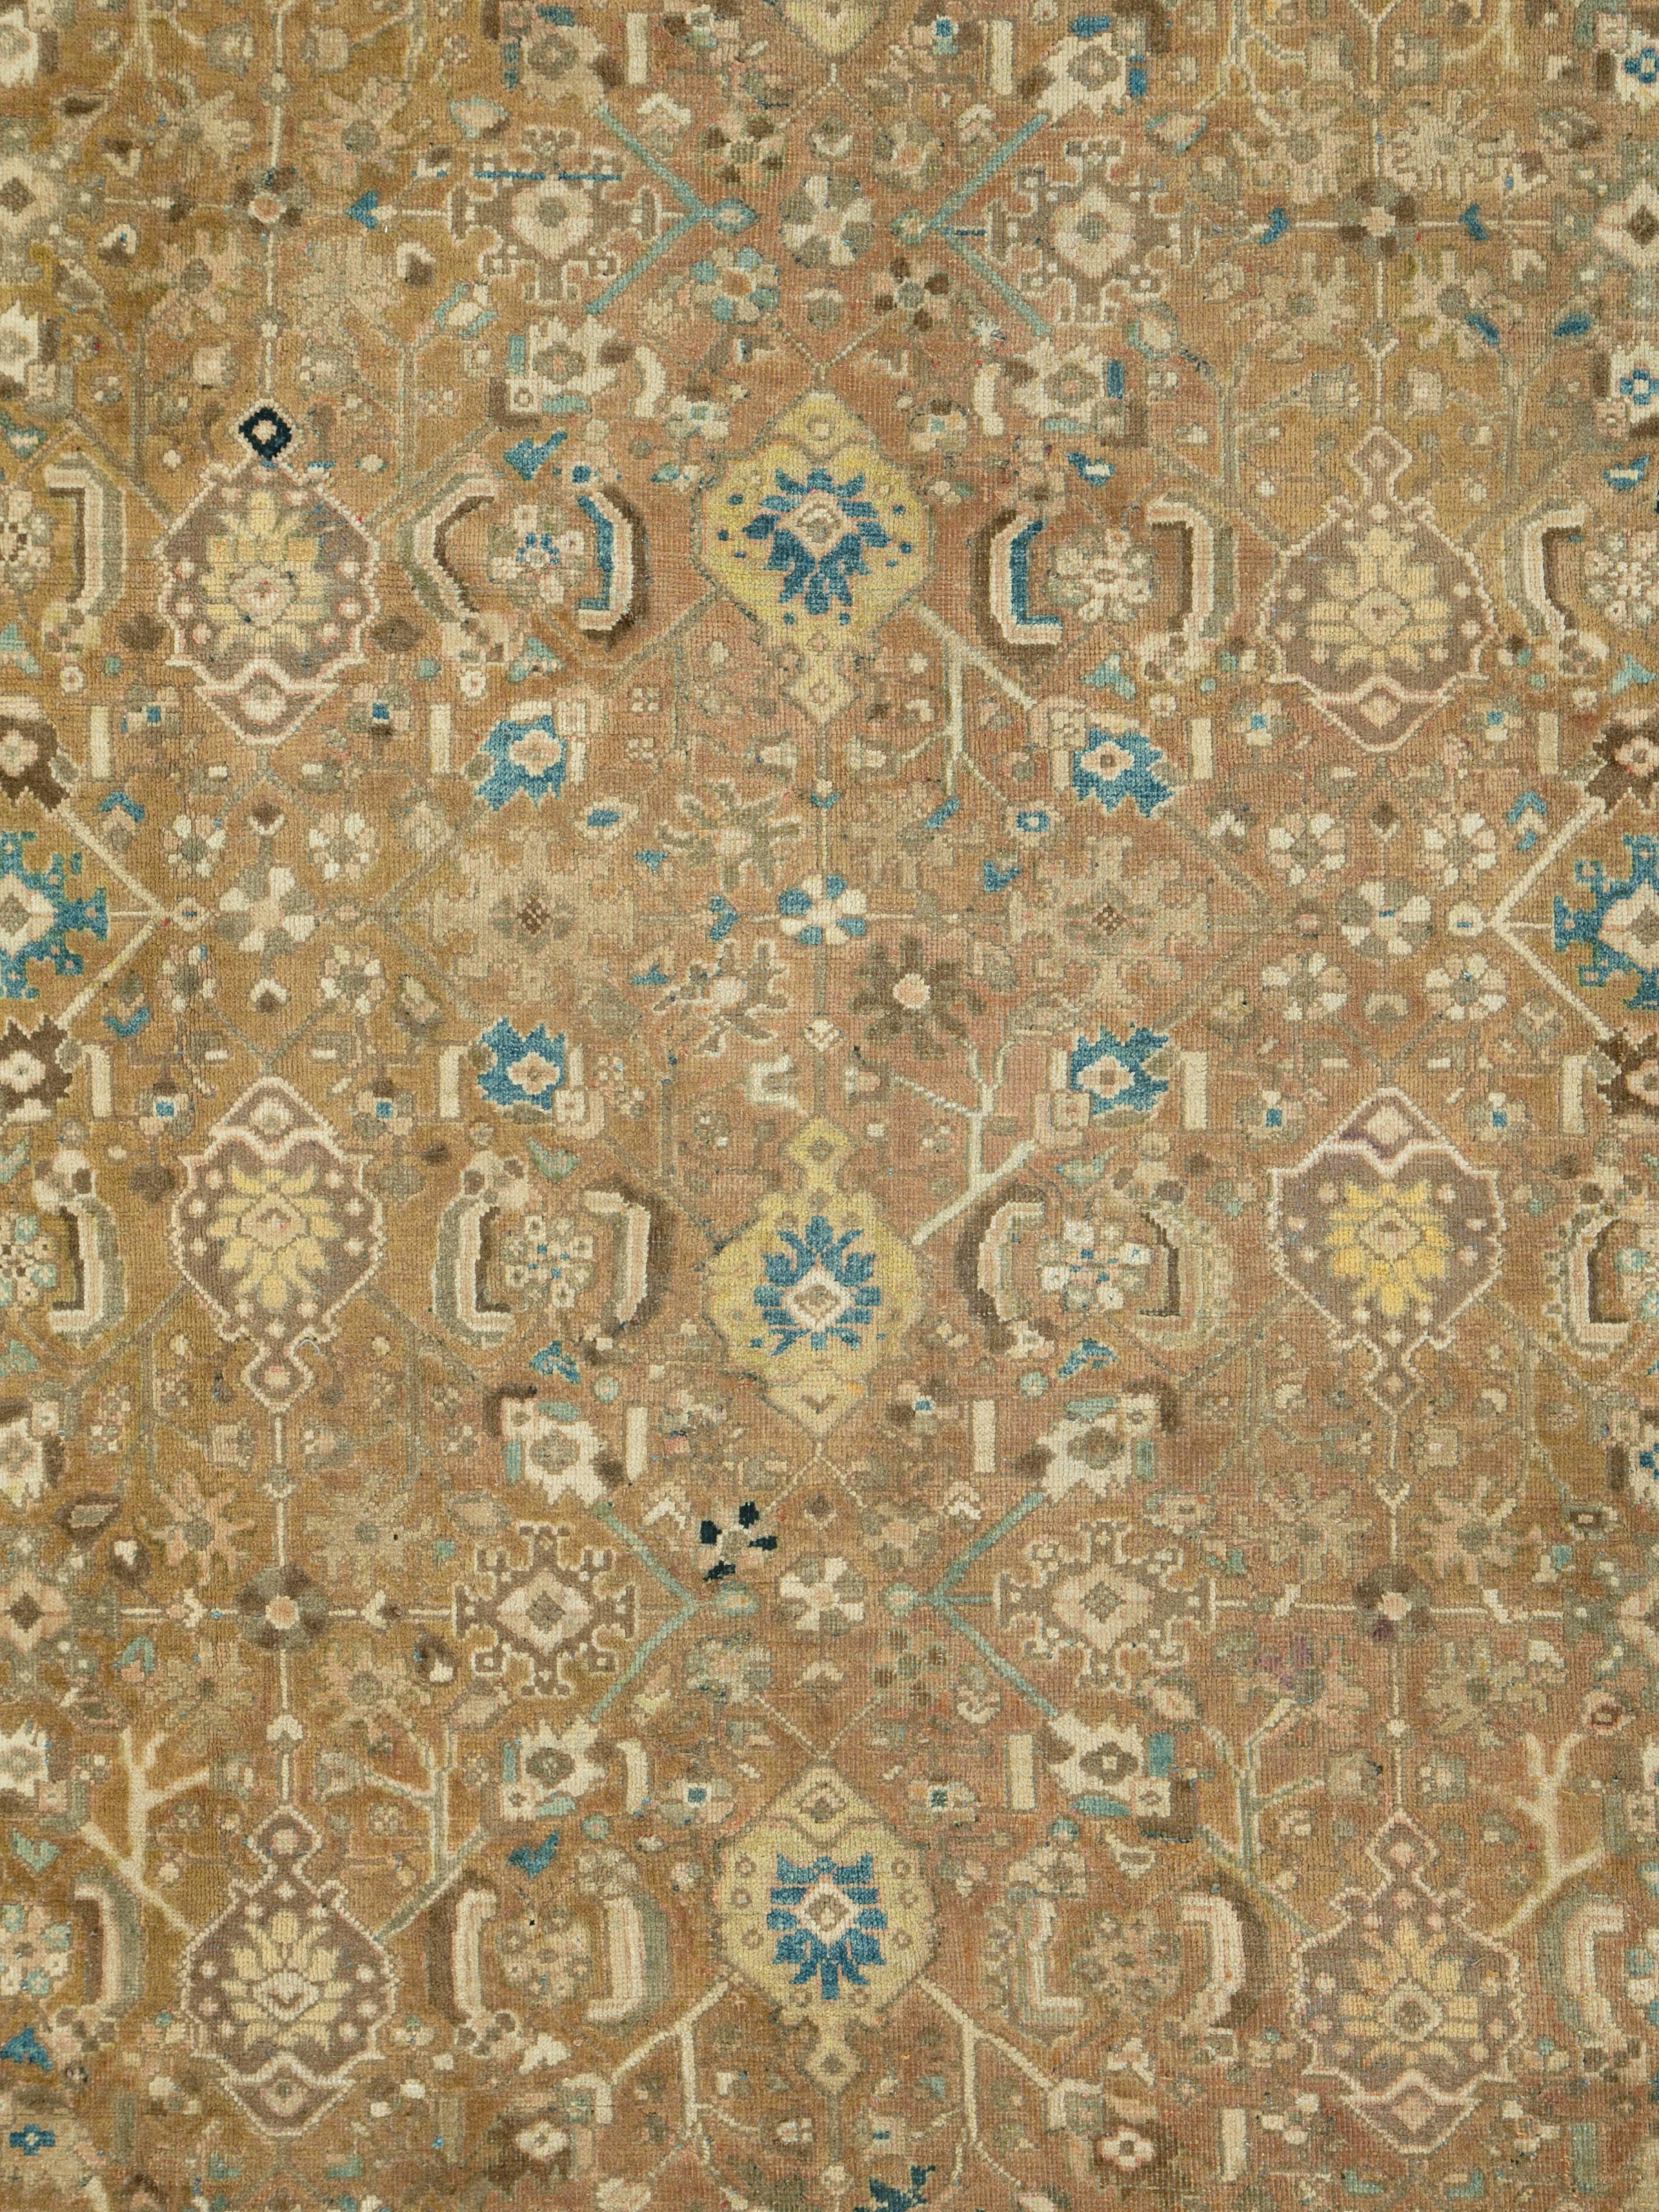 A vintage Persian Mahal rug from the mid-20th century.